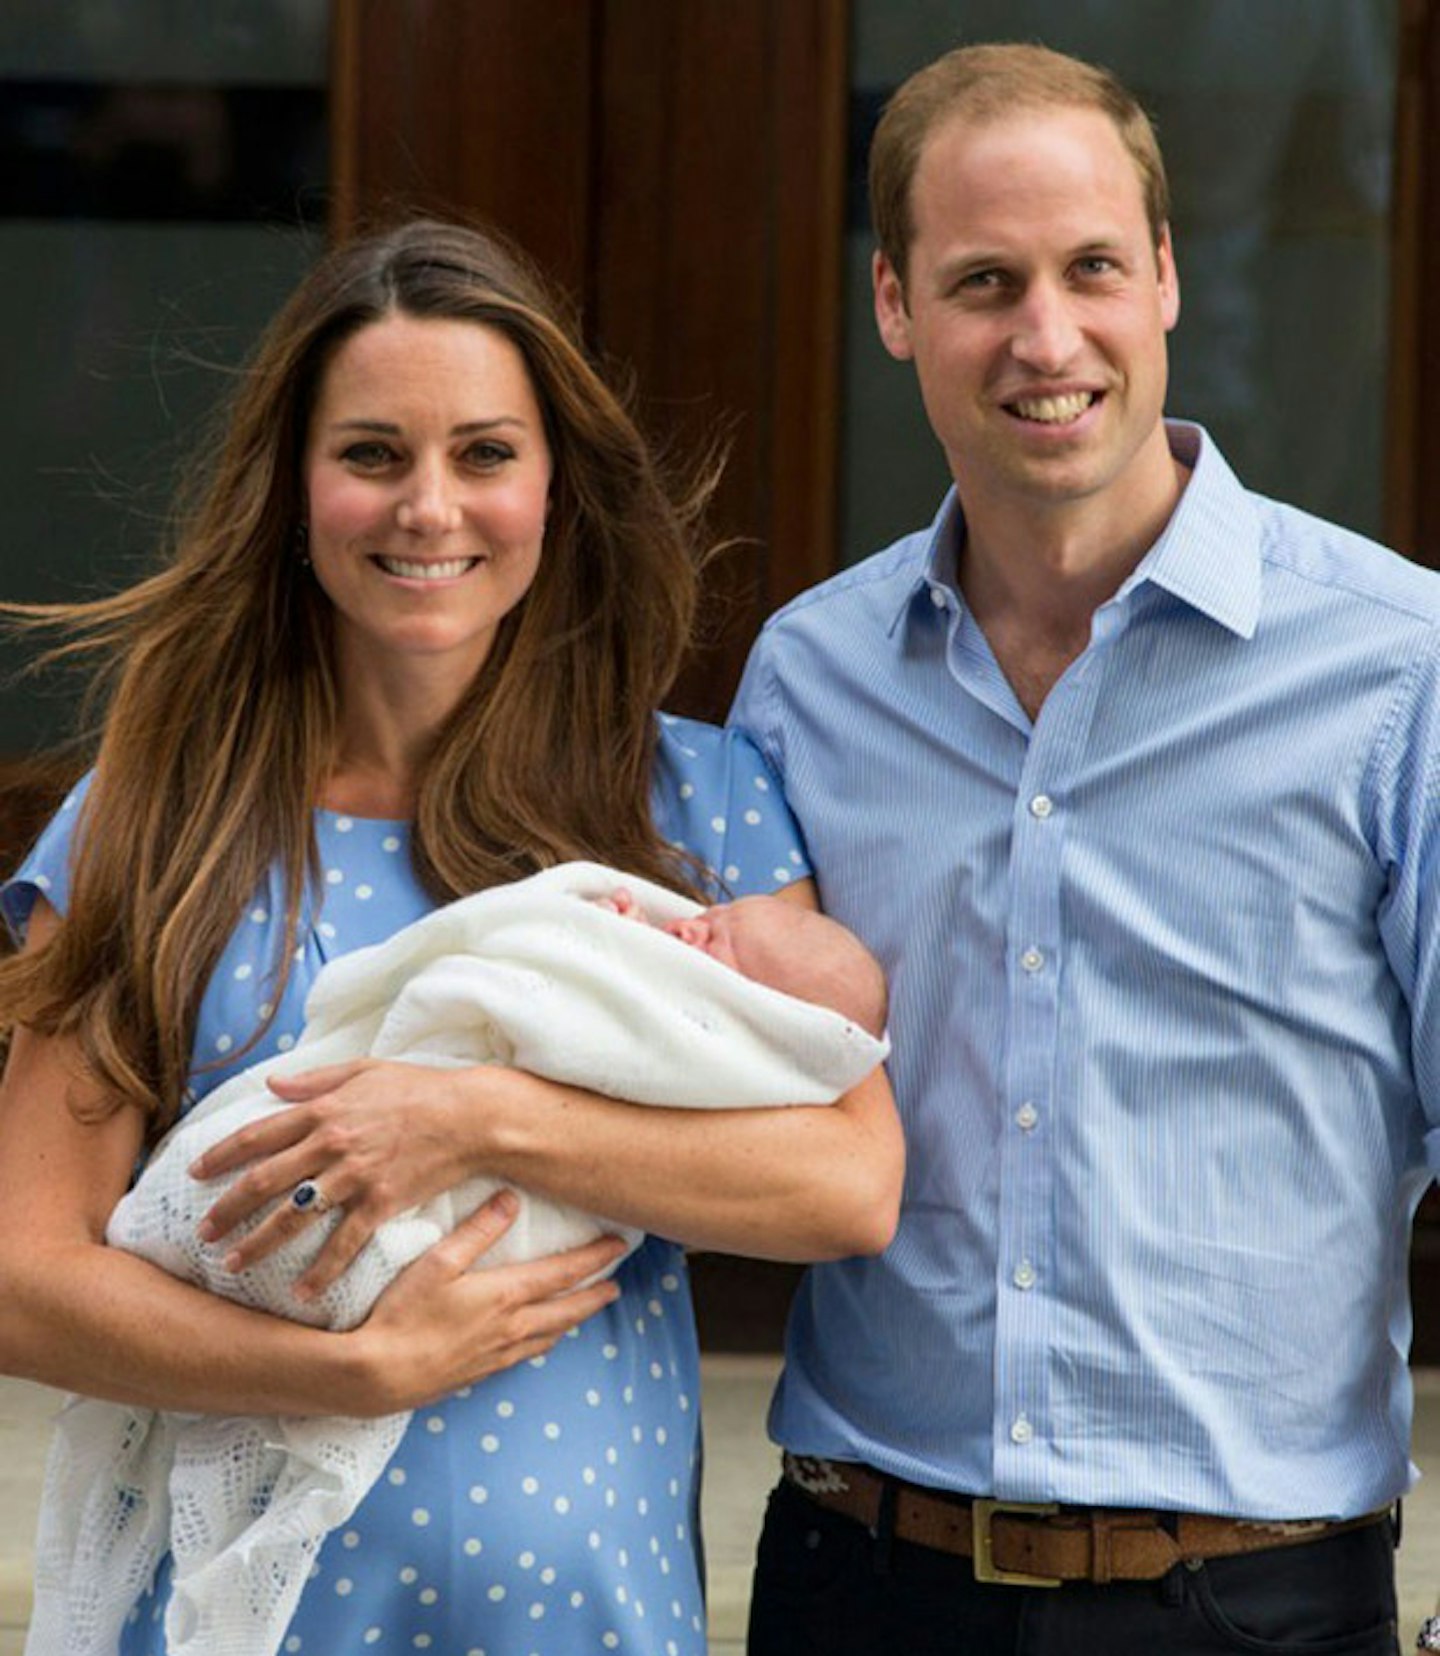 July 2013: Prince William and Kate Middleton welcomed son George